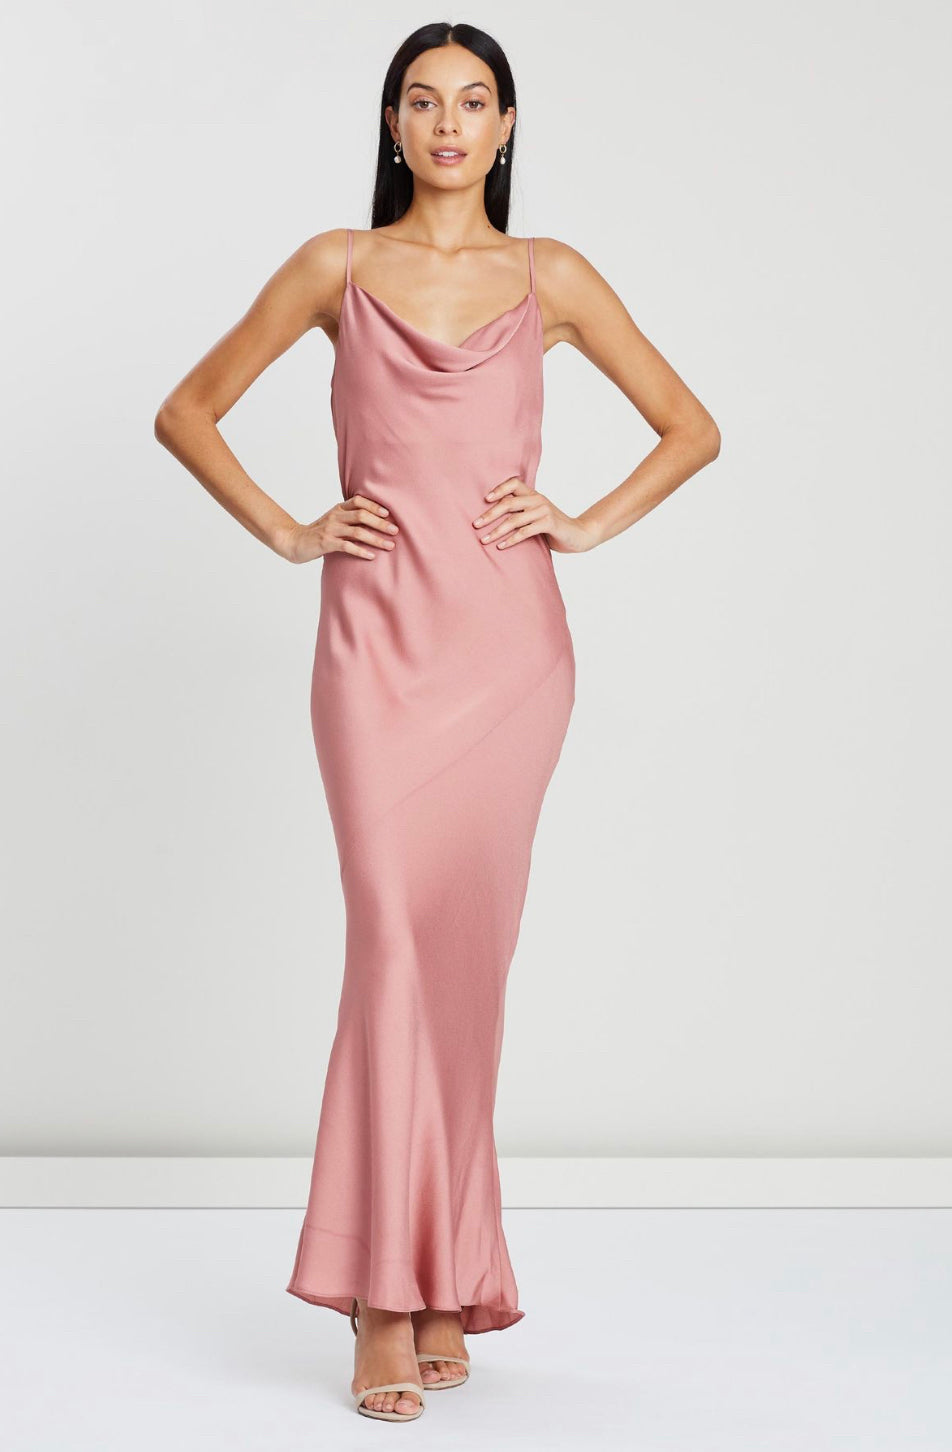 Shona Joy Luxe Bias Cowl Slip Dress front view of rose dress, model with hands on hips